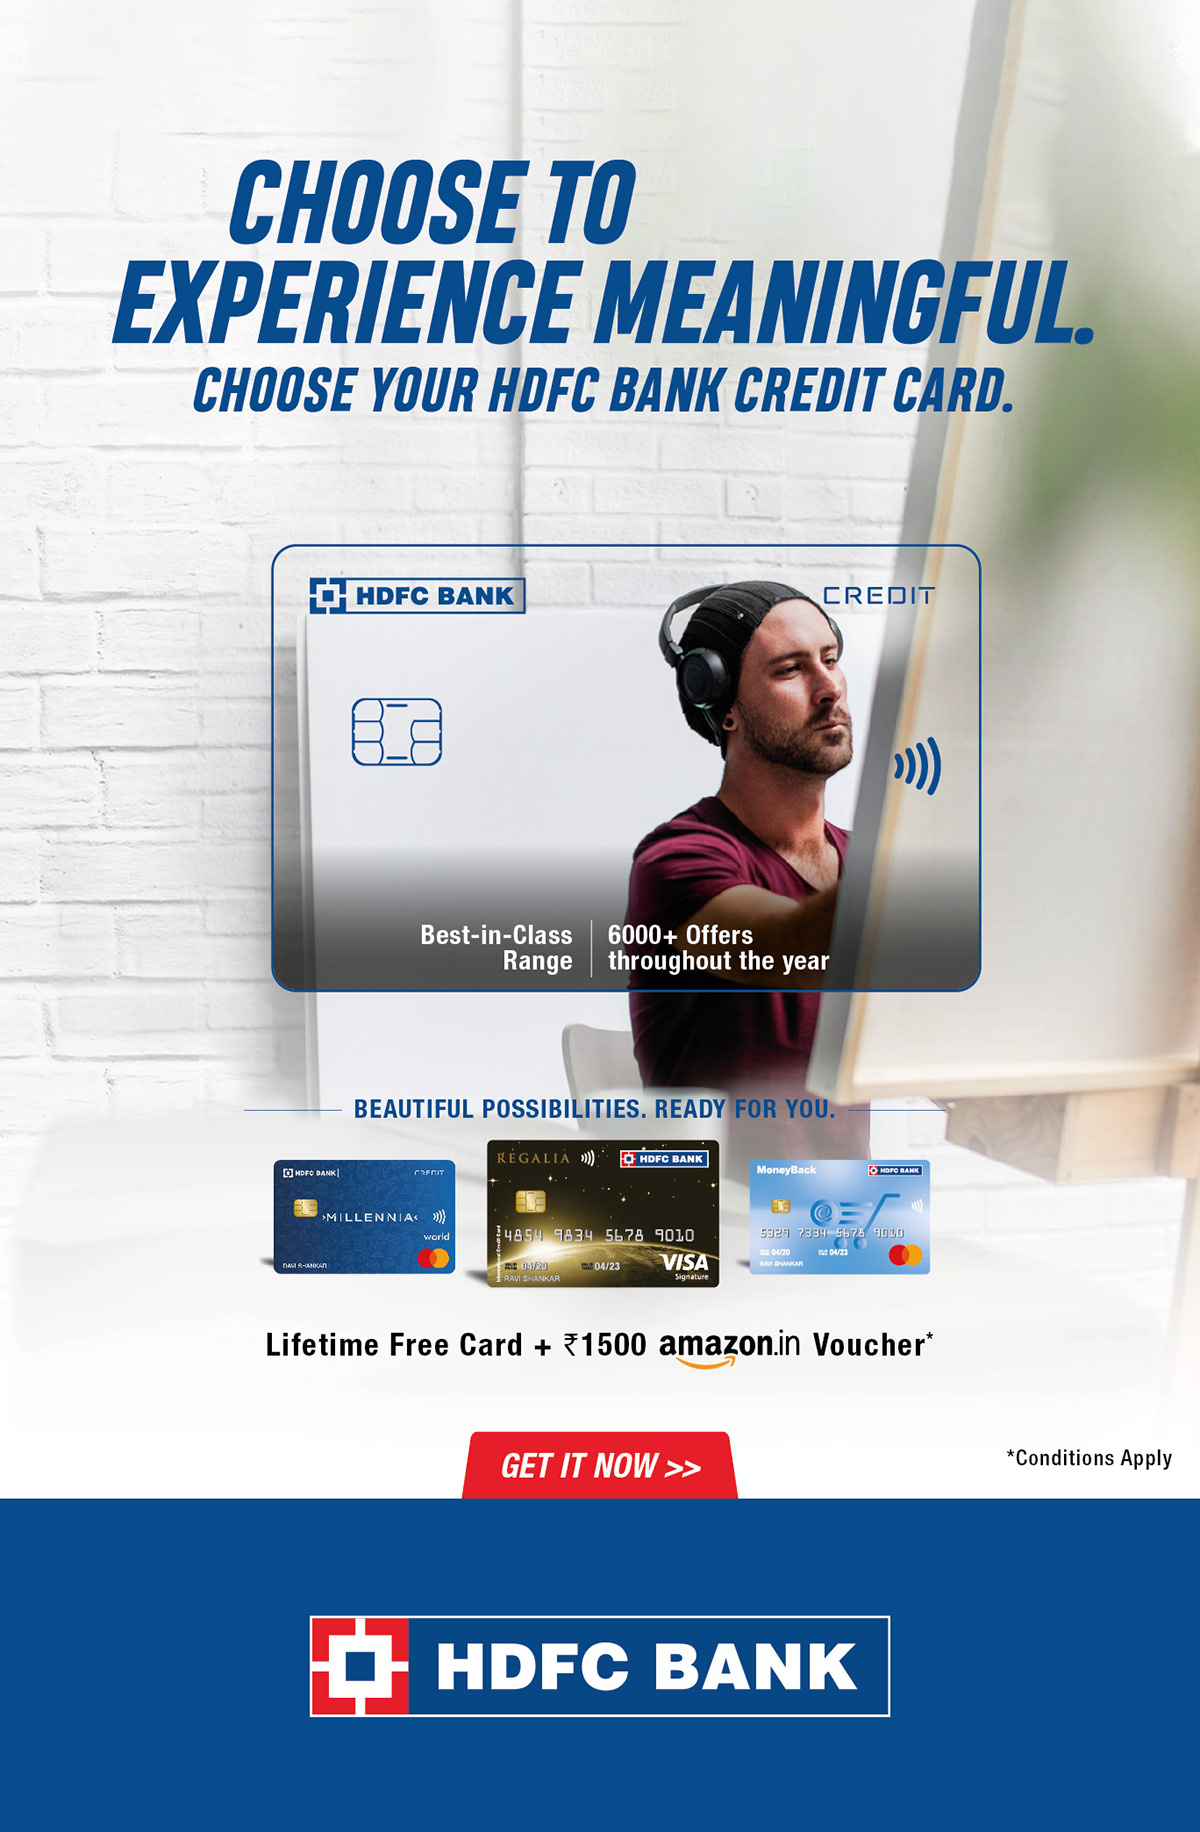 Bank credit card Experience explore finance HDFC Bank money offers possibility spend